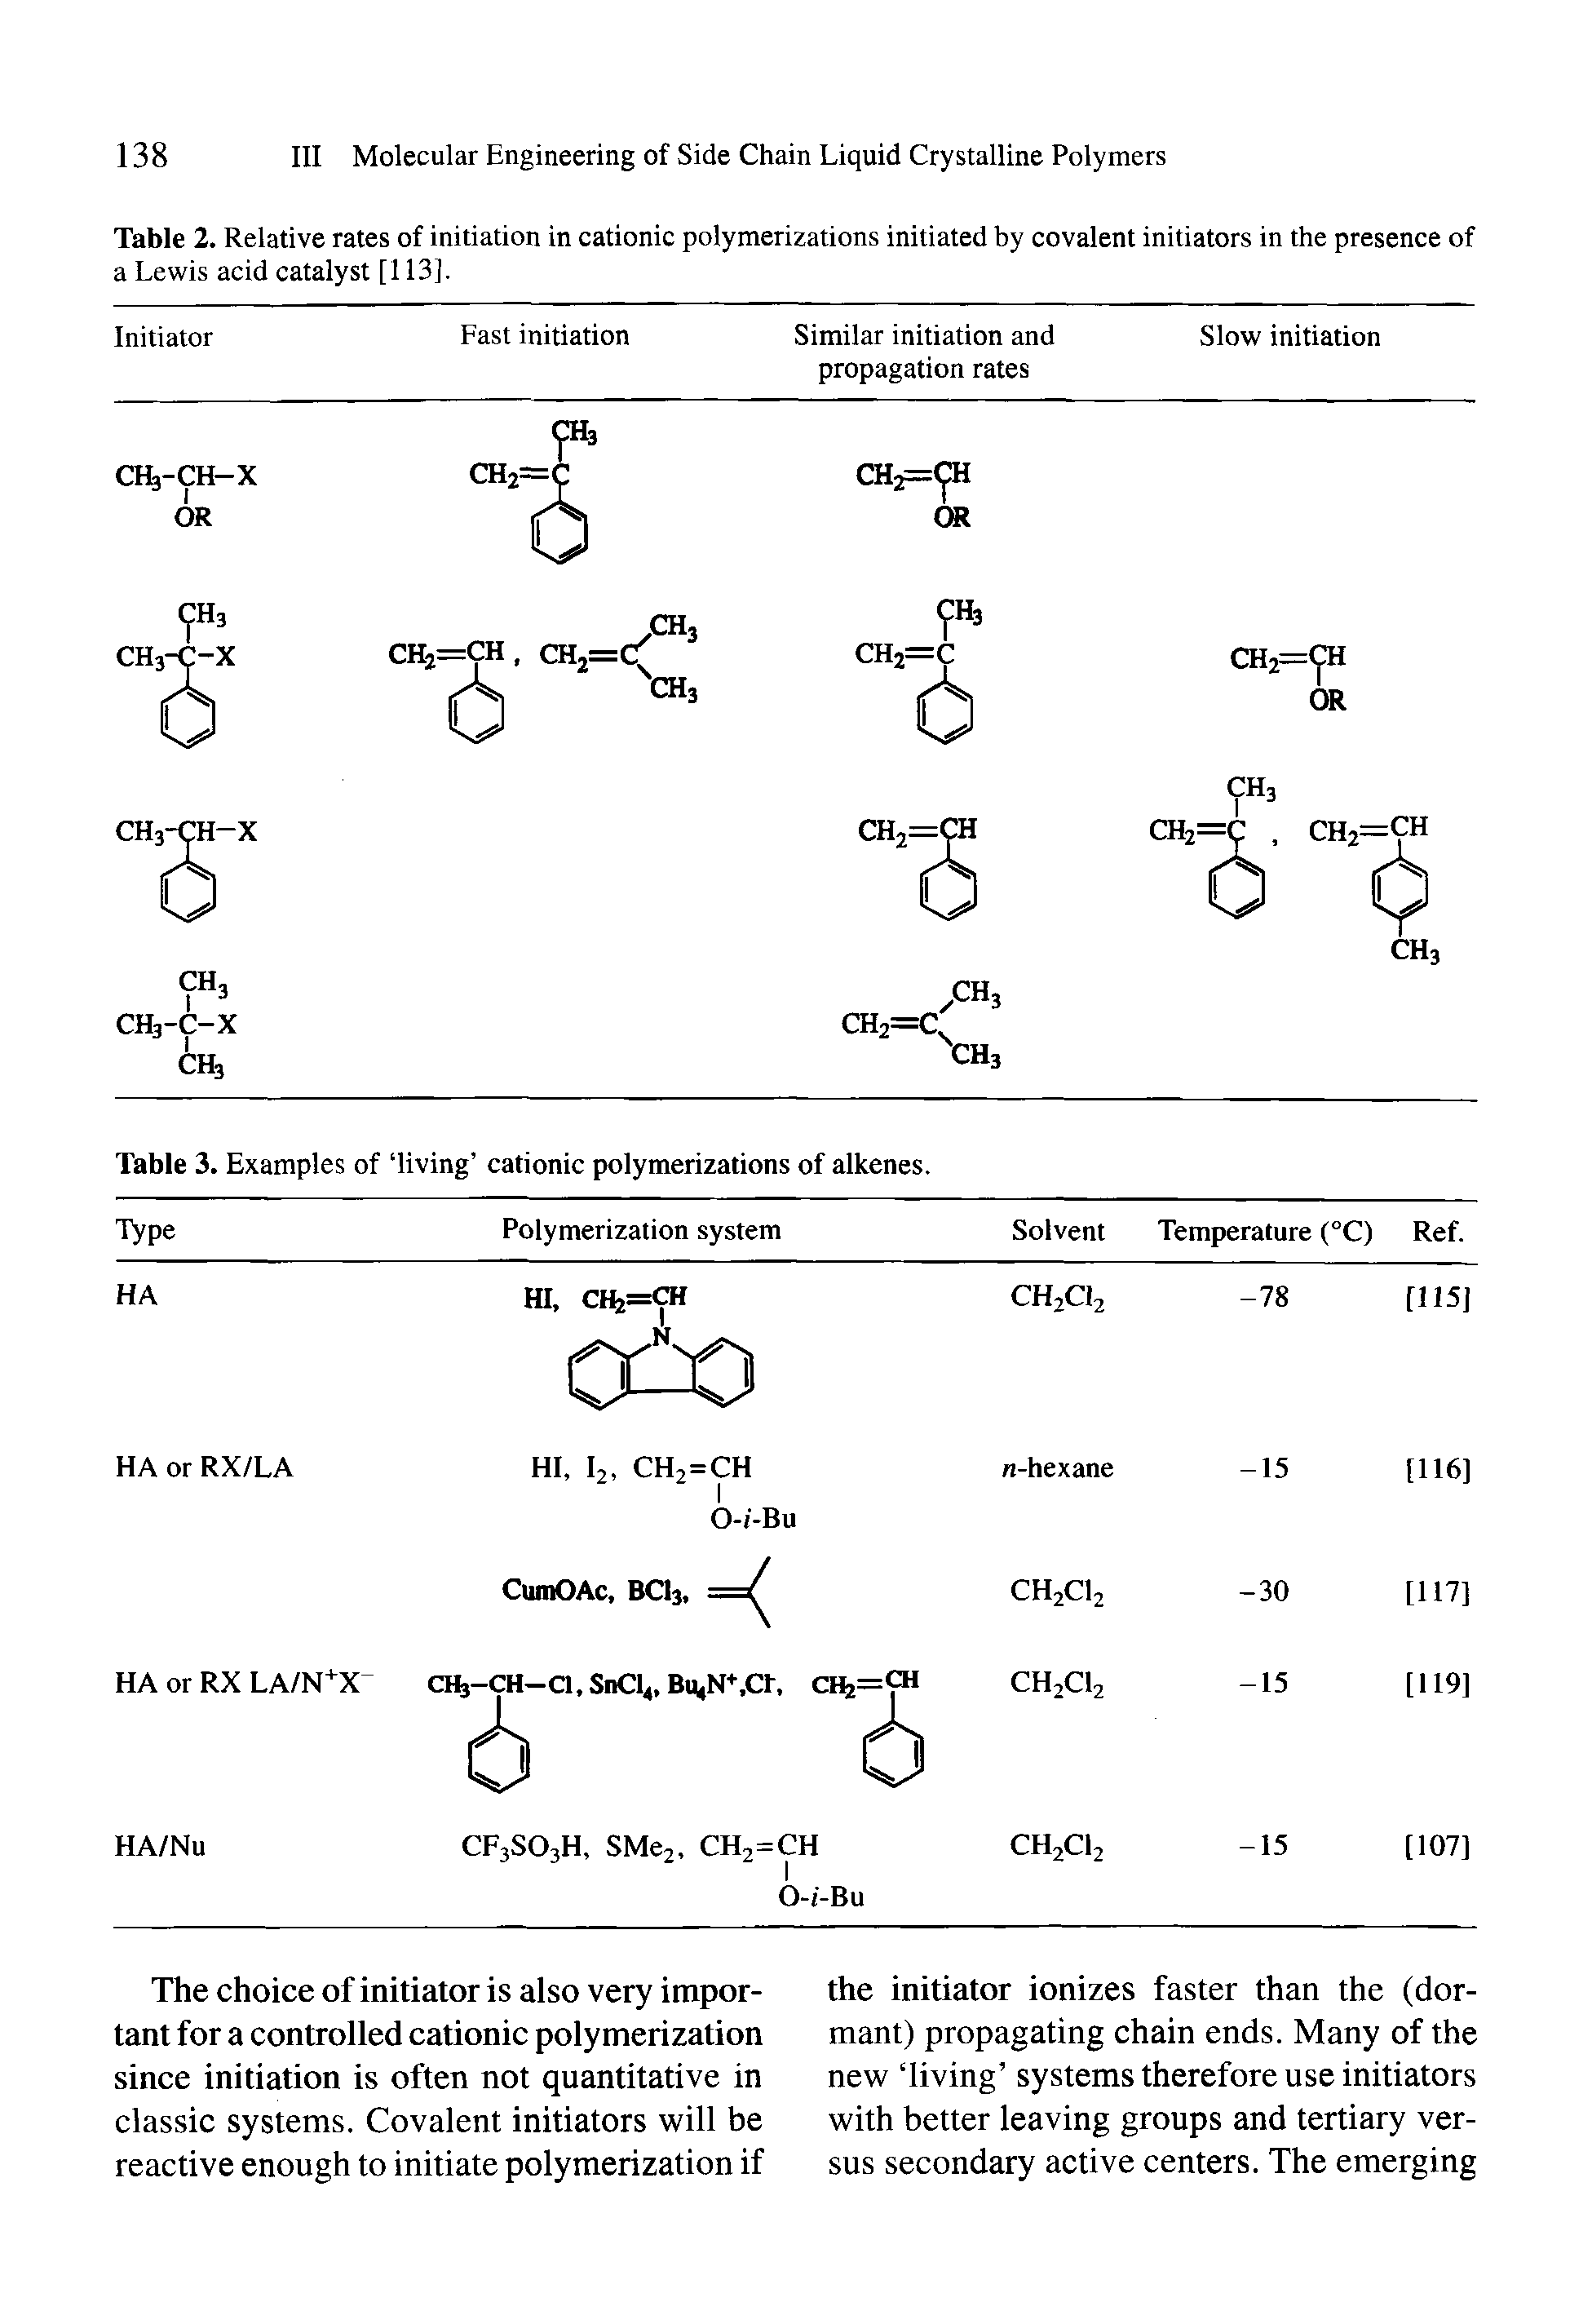 Table 2. Relative rates of initiation in cationic polymerizations initiated by covalent initiators in the presence of a Lewis acid catalyst [113].